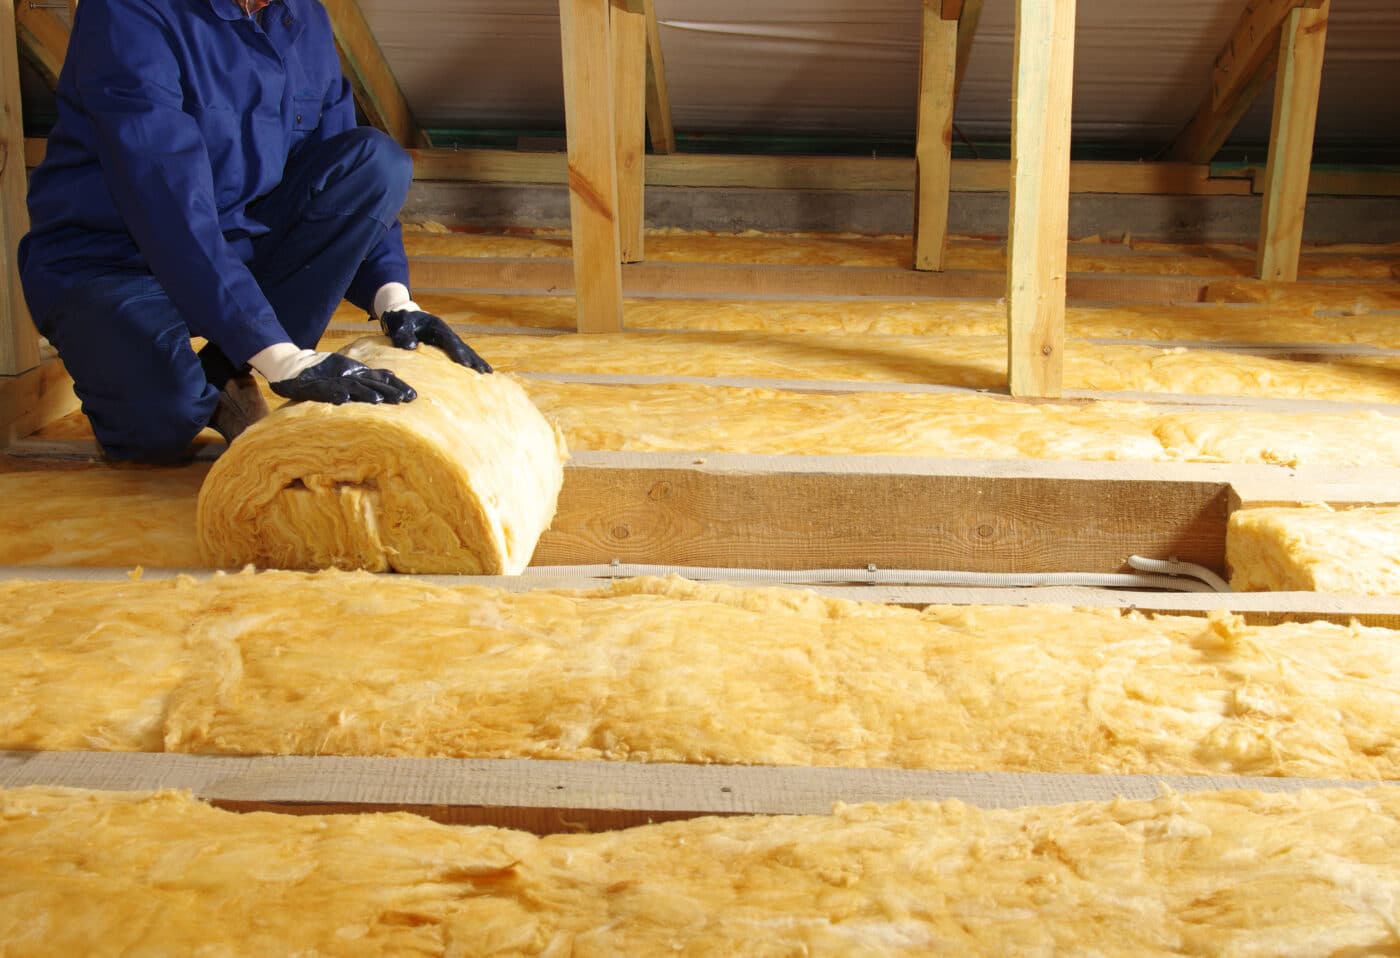 An installer completes unrolling a layer of insulation between wooden joists.